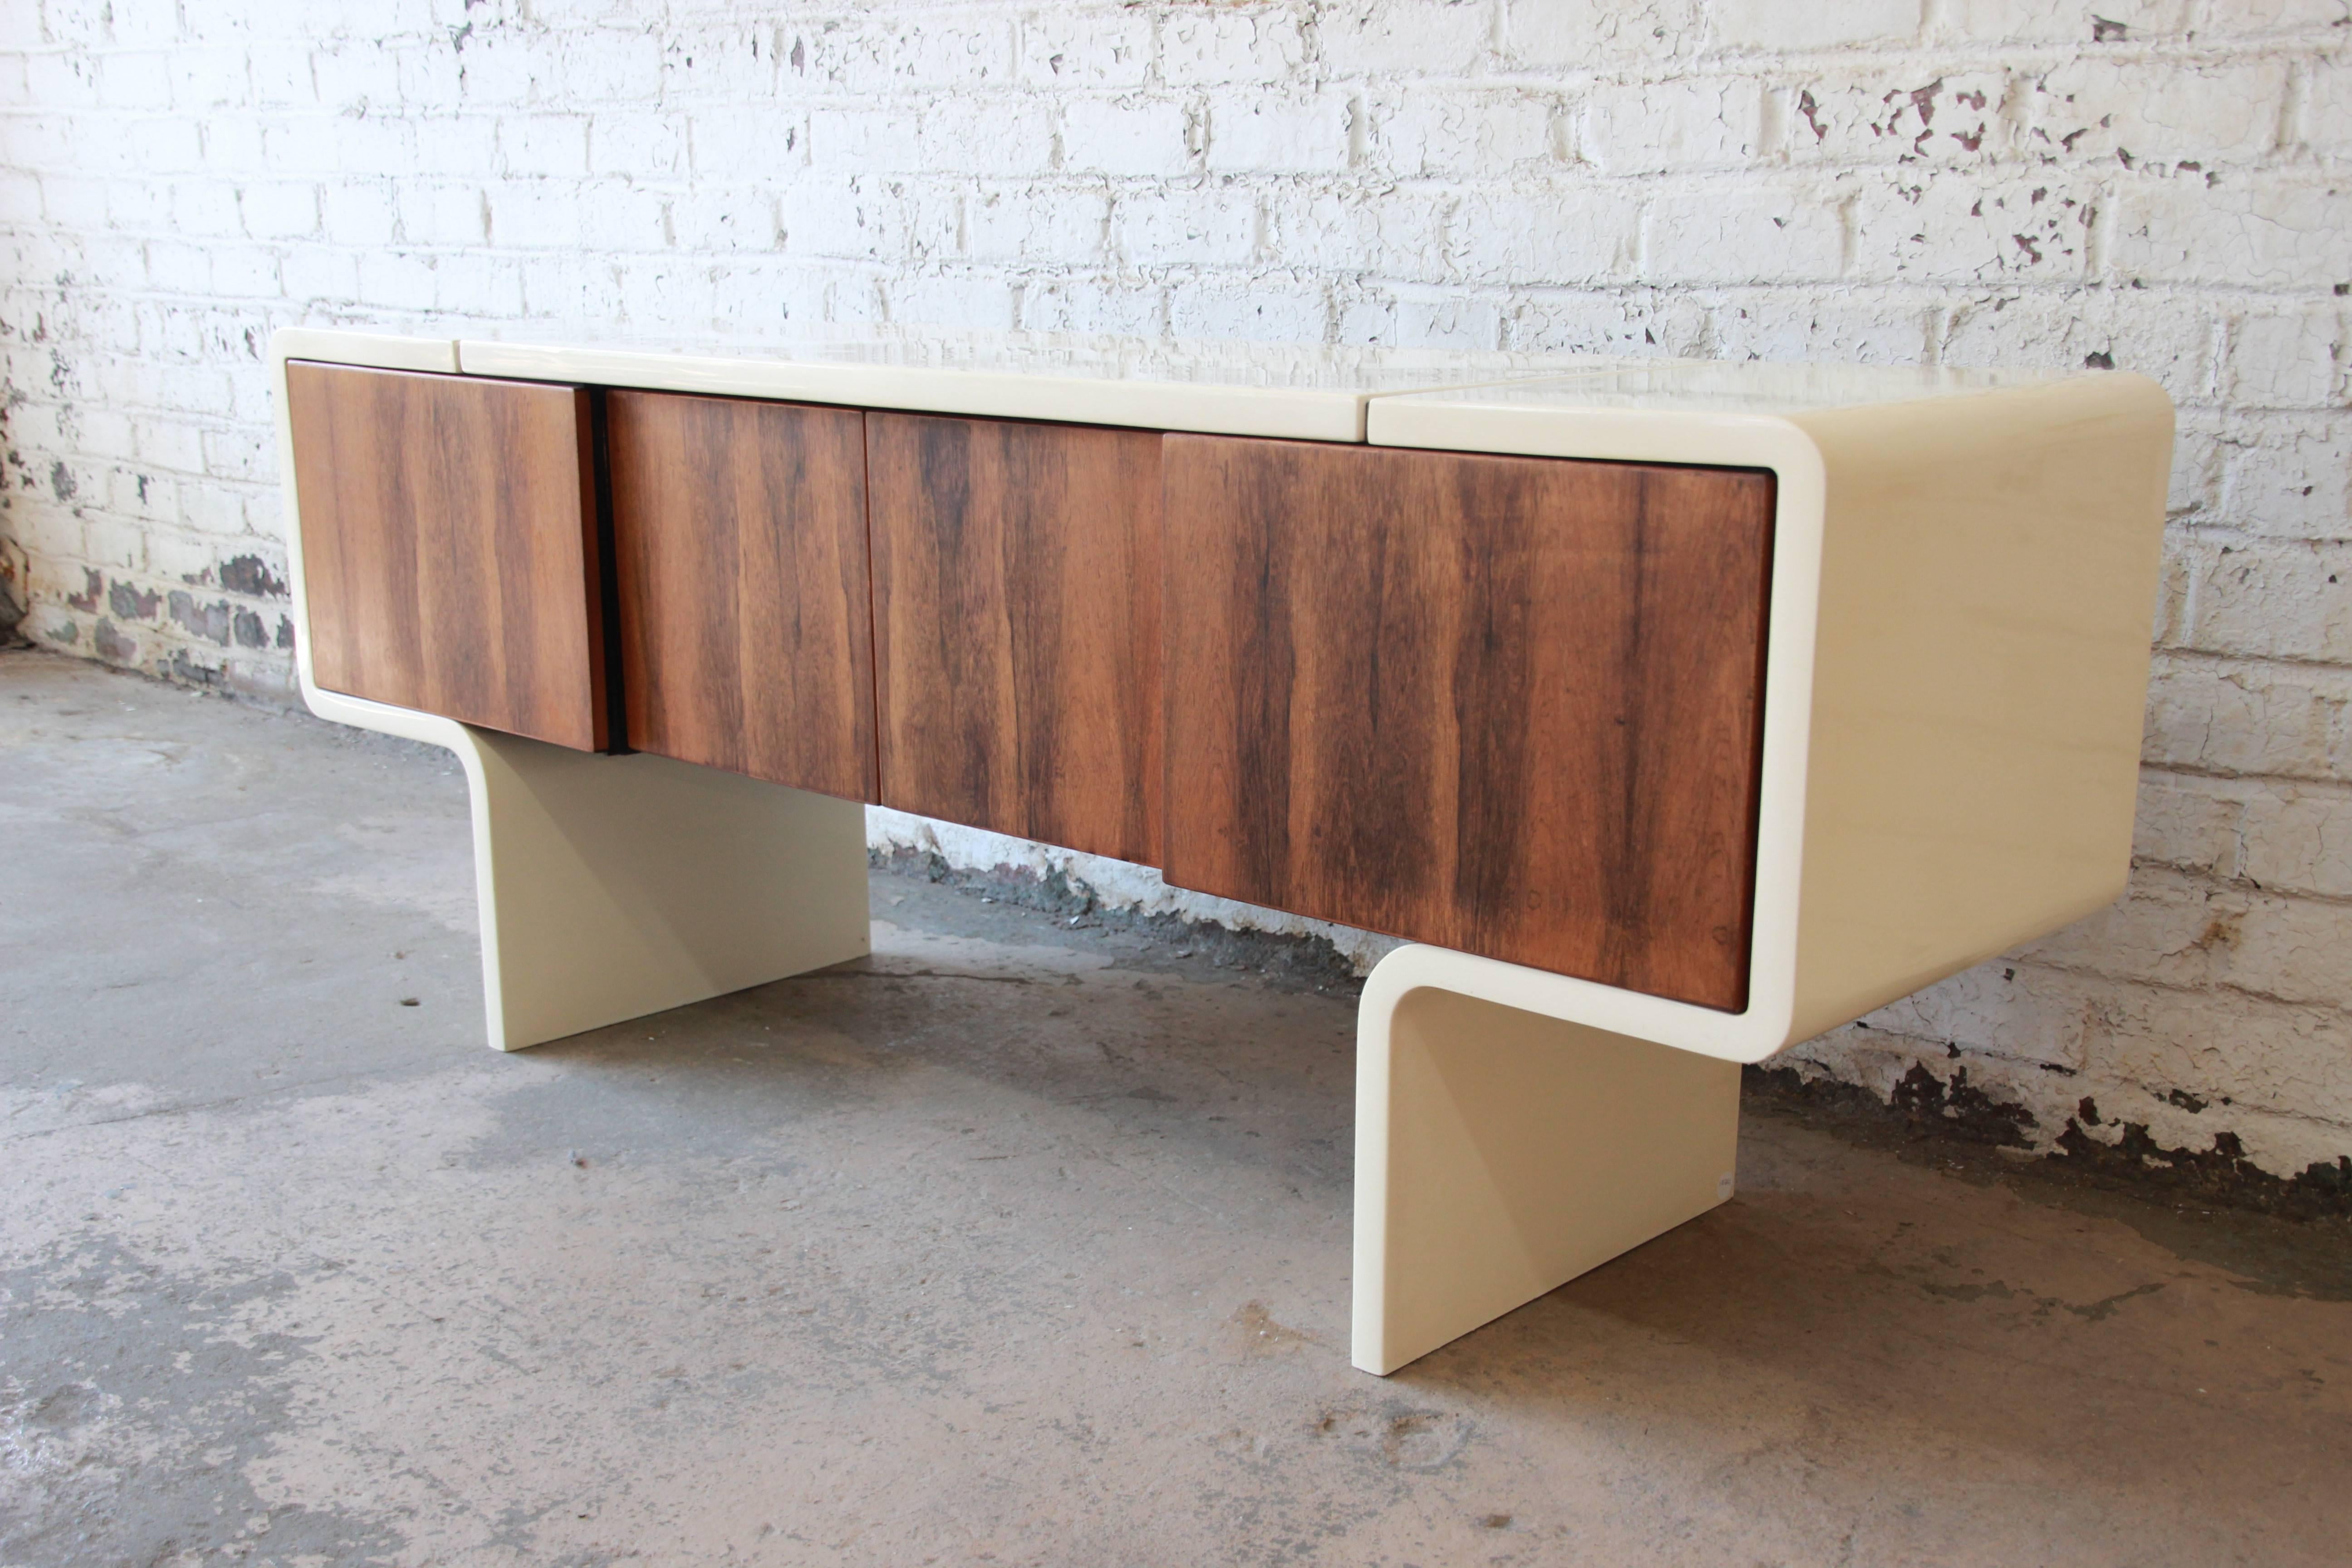 An exceptional and rare Mid-Century Modern uniplane credenza designed by William Sklaroff for Vecta, circa 1970s. The credenza features a stunning rosewood case, finished on both sides and supported by a reinforced lacquered fiberglass frame. The